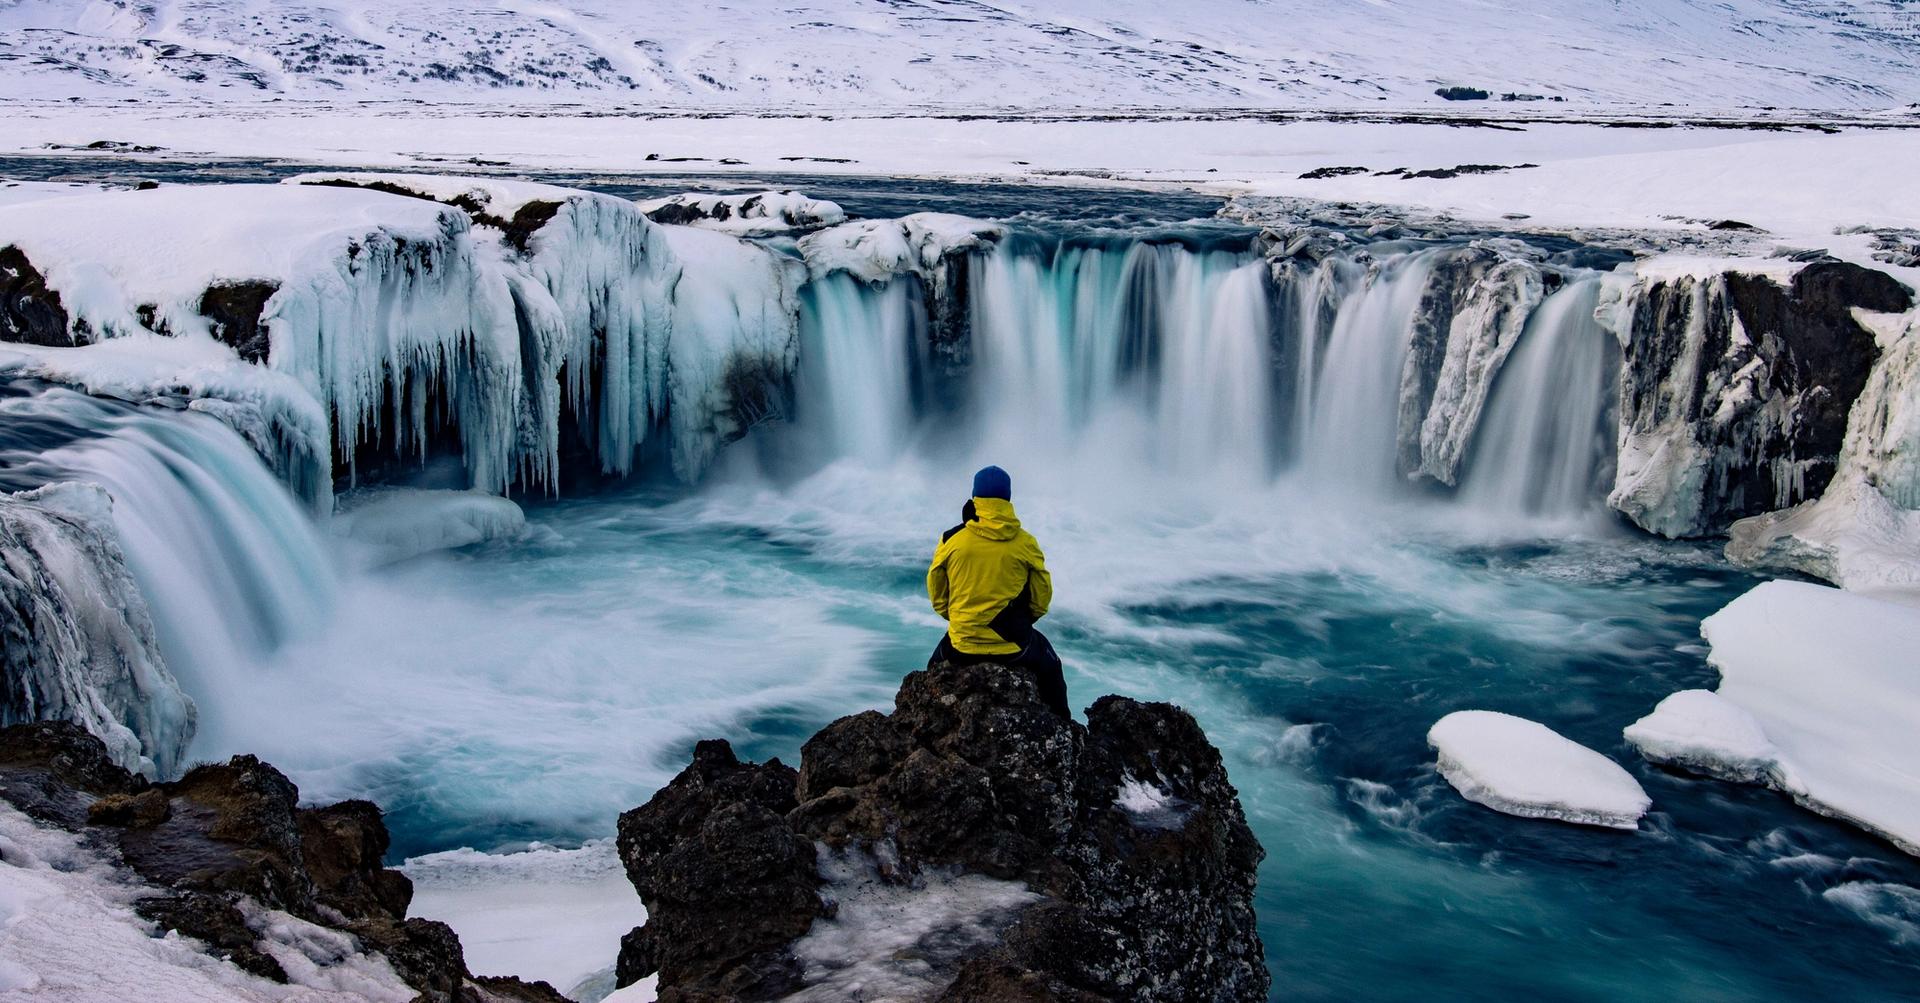 The Godafoss, famous waterfall in Iceland